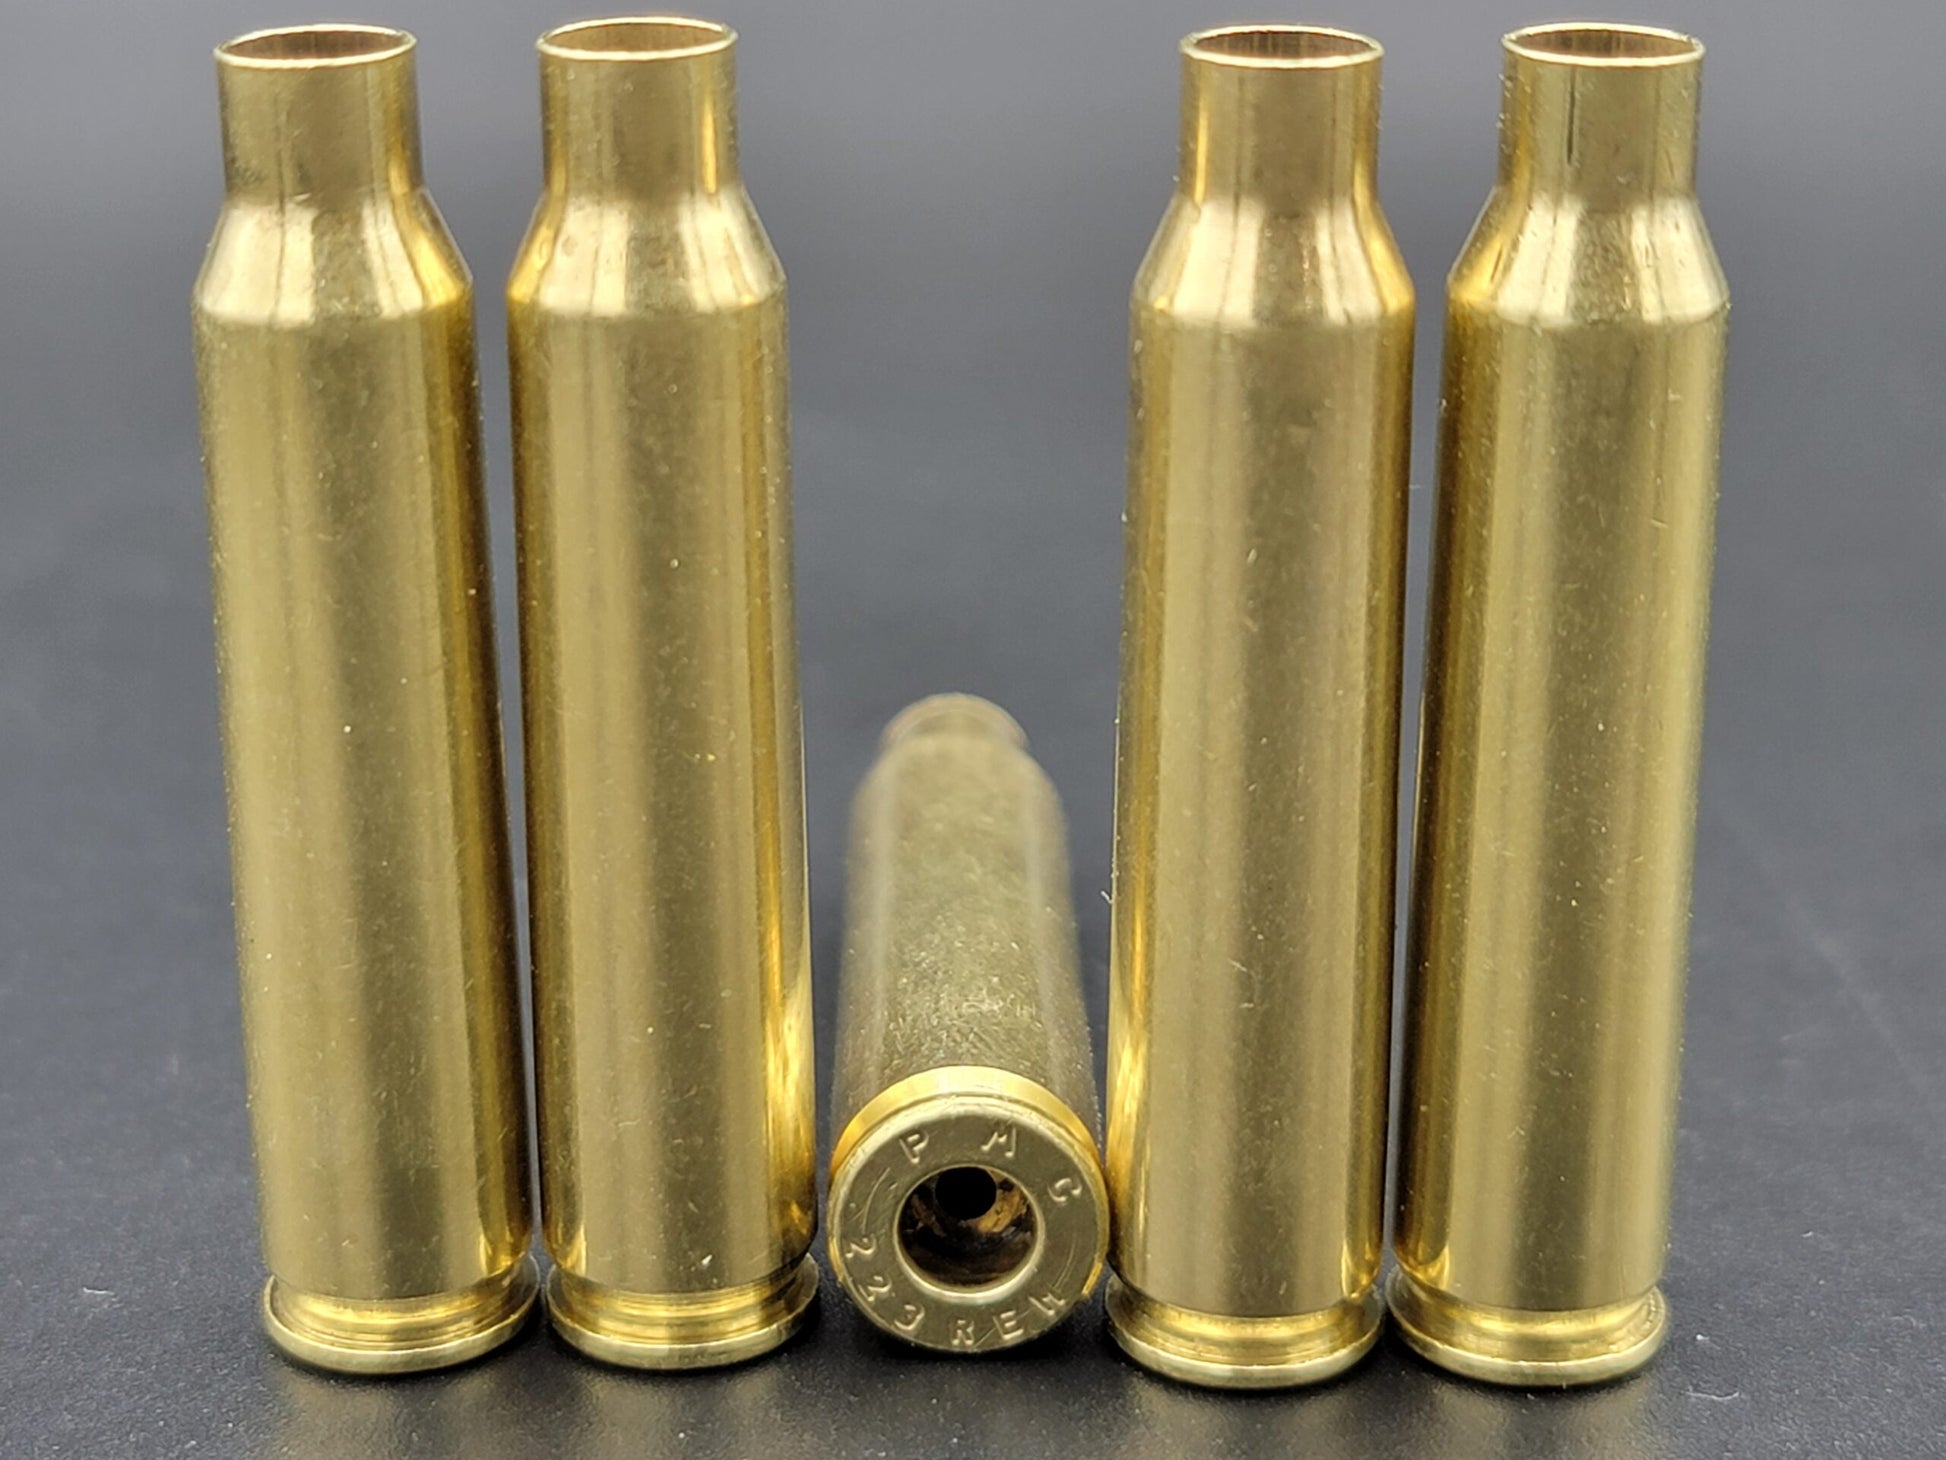 223/5.56 processed once fired rifle brass. Hand sorted from reputable indoor/military ranges for reloading. Reliable spent casings for precision shooting.